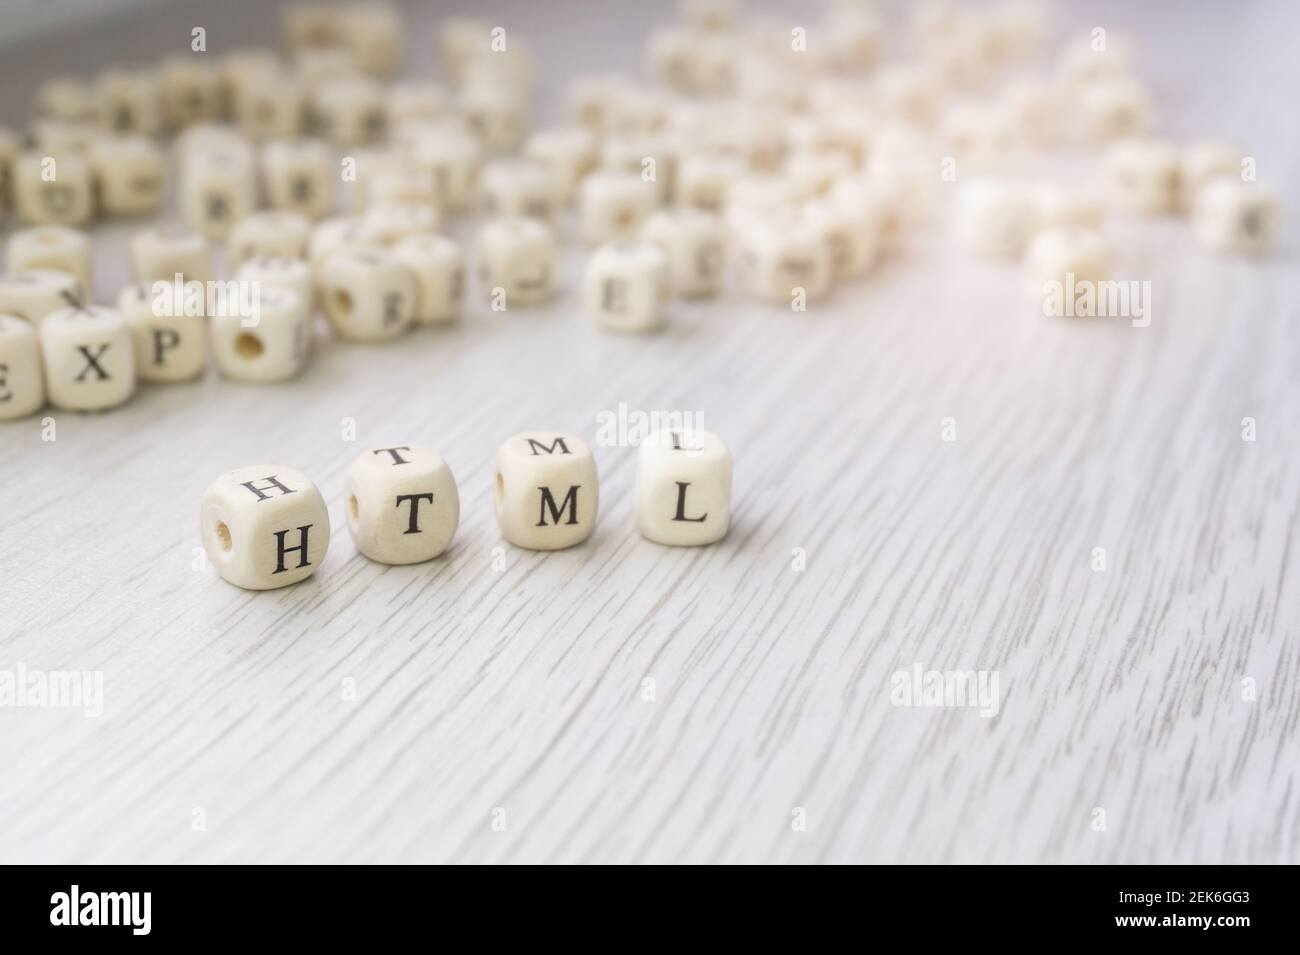 HTML word written in wooden cubes Stock Photo